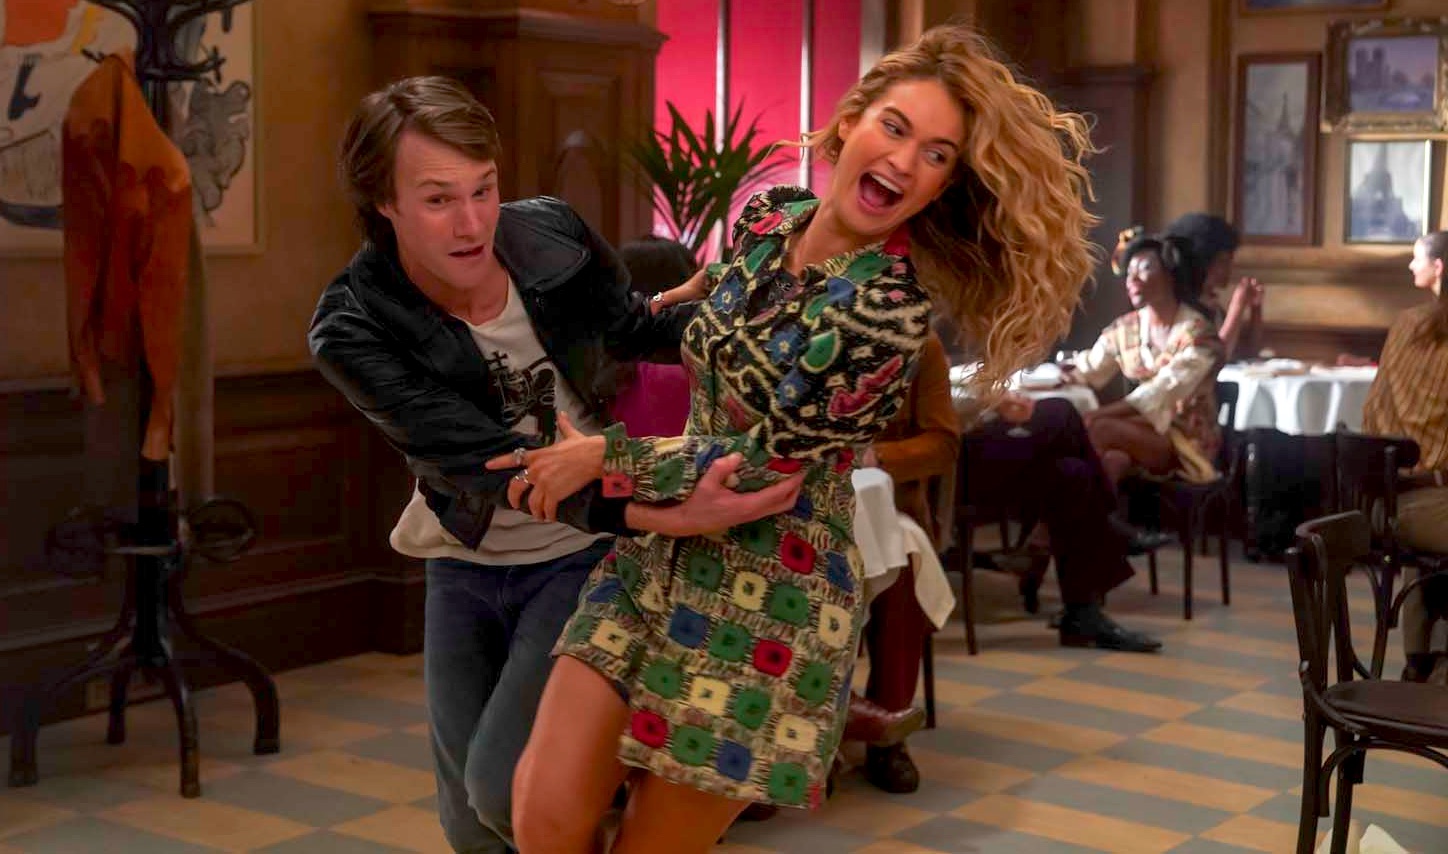 Hugh Skinner as young Harry and Lily James as young Donna in Mamma Mia! Here We Go Again